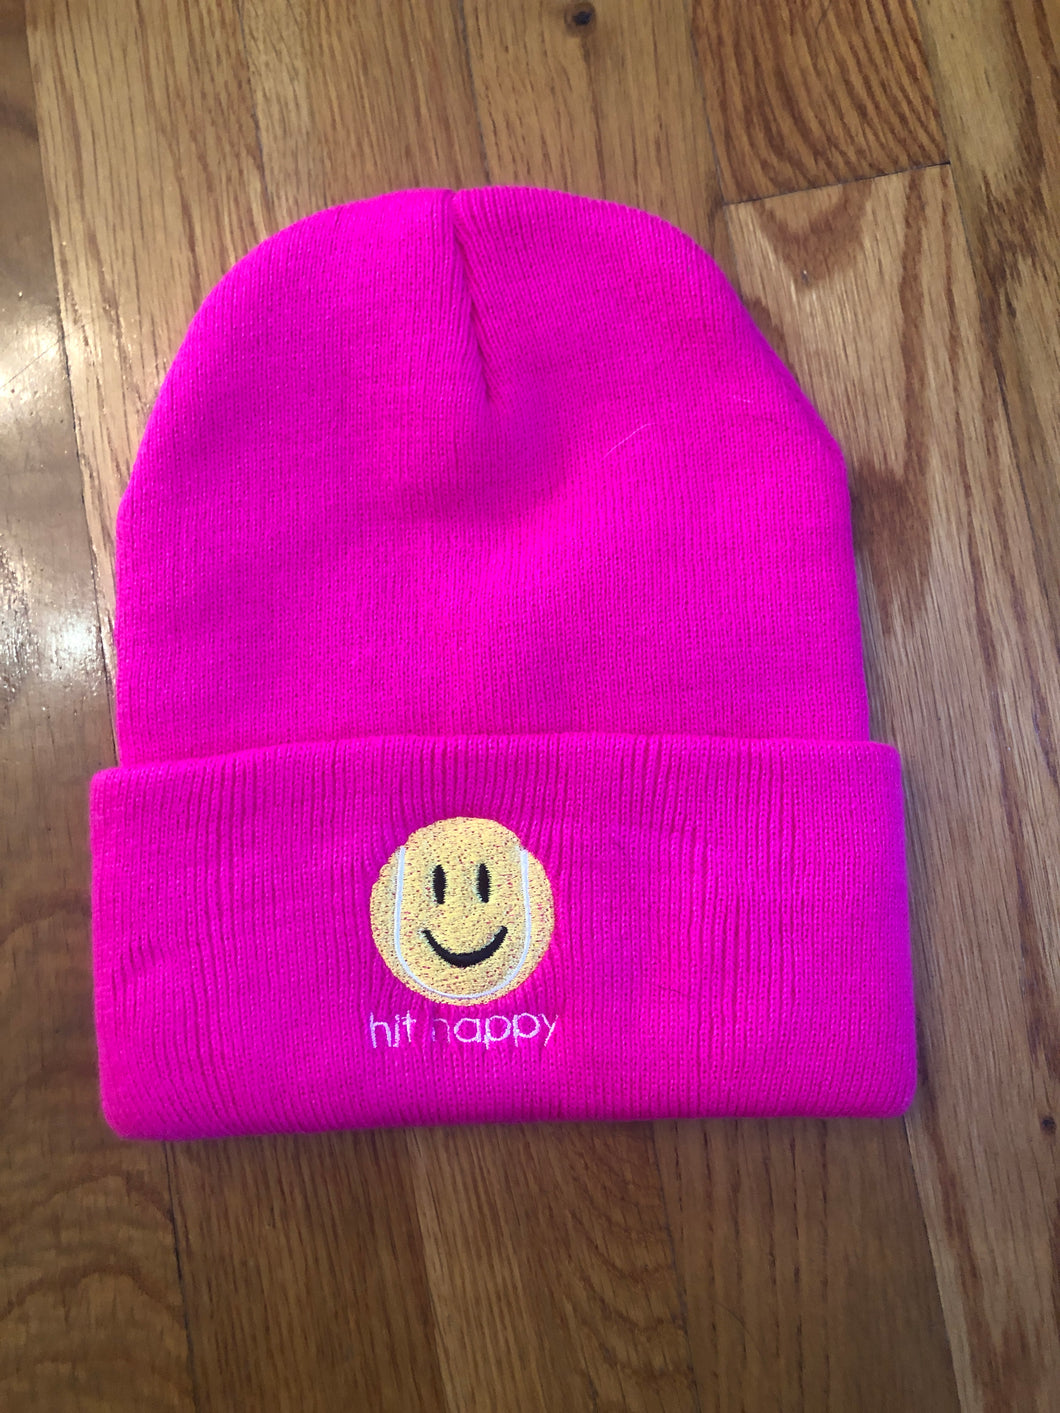 Embroidered Hit Happy Beanie